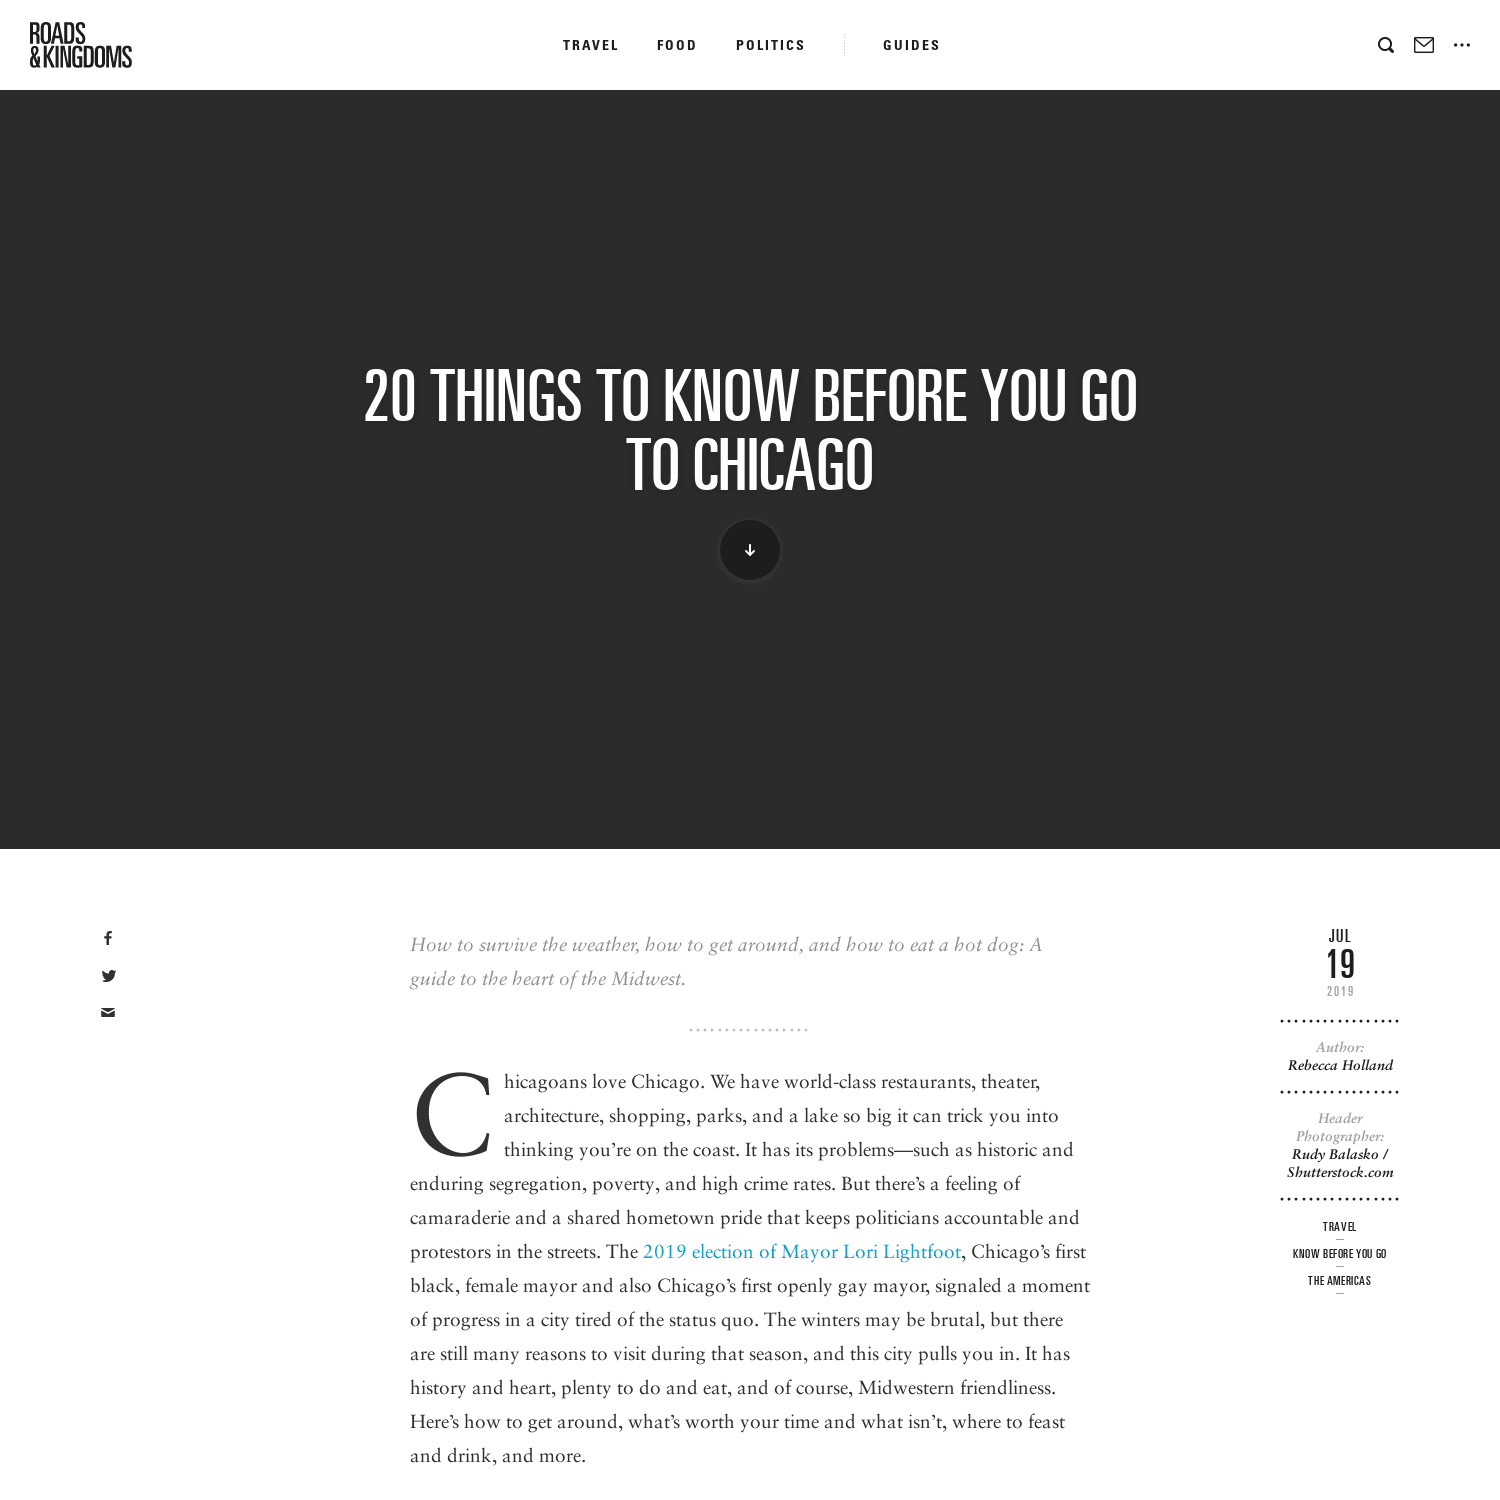 What to know before you go to Chicago